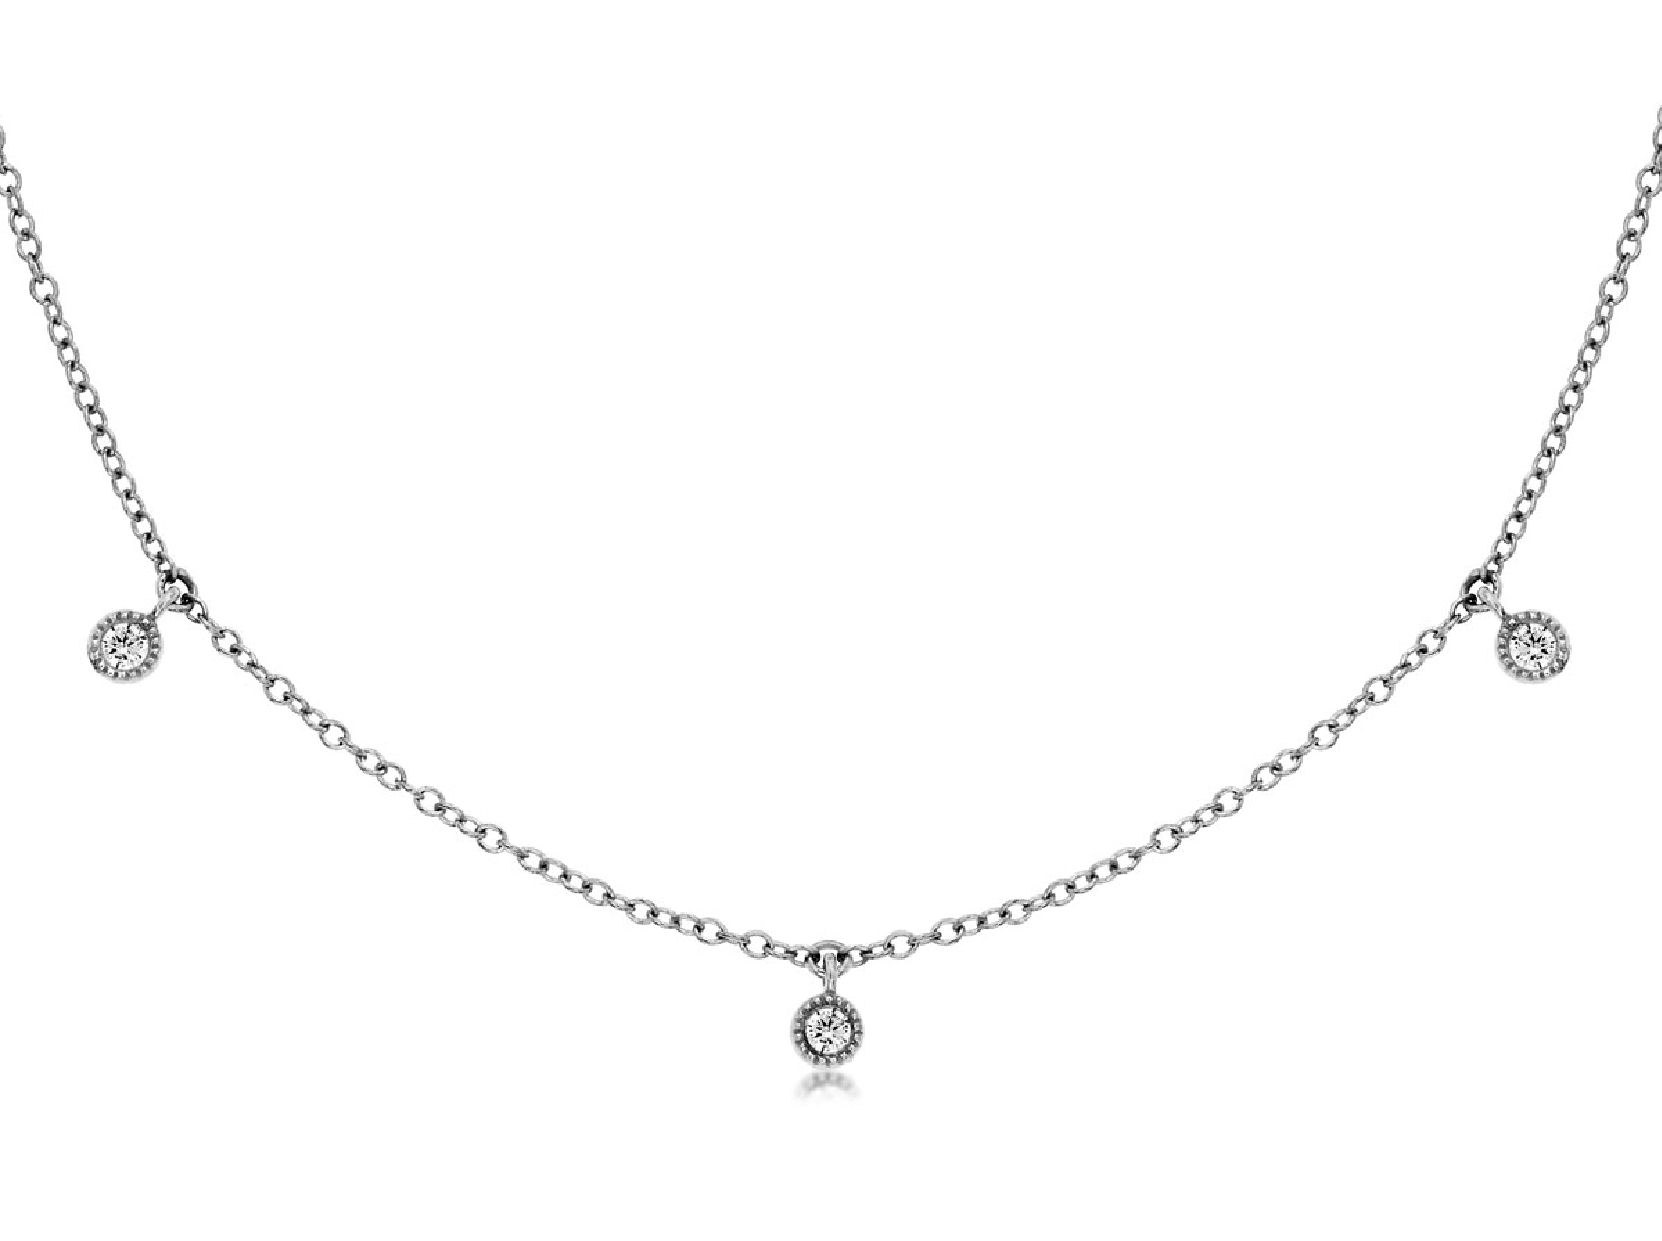 14K White Gold Diamond Station Necklace
0.14ct
18 Inches